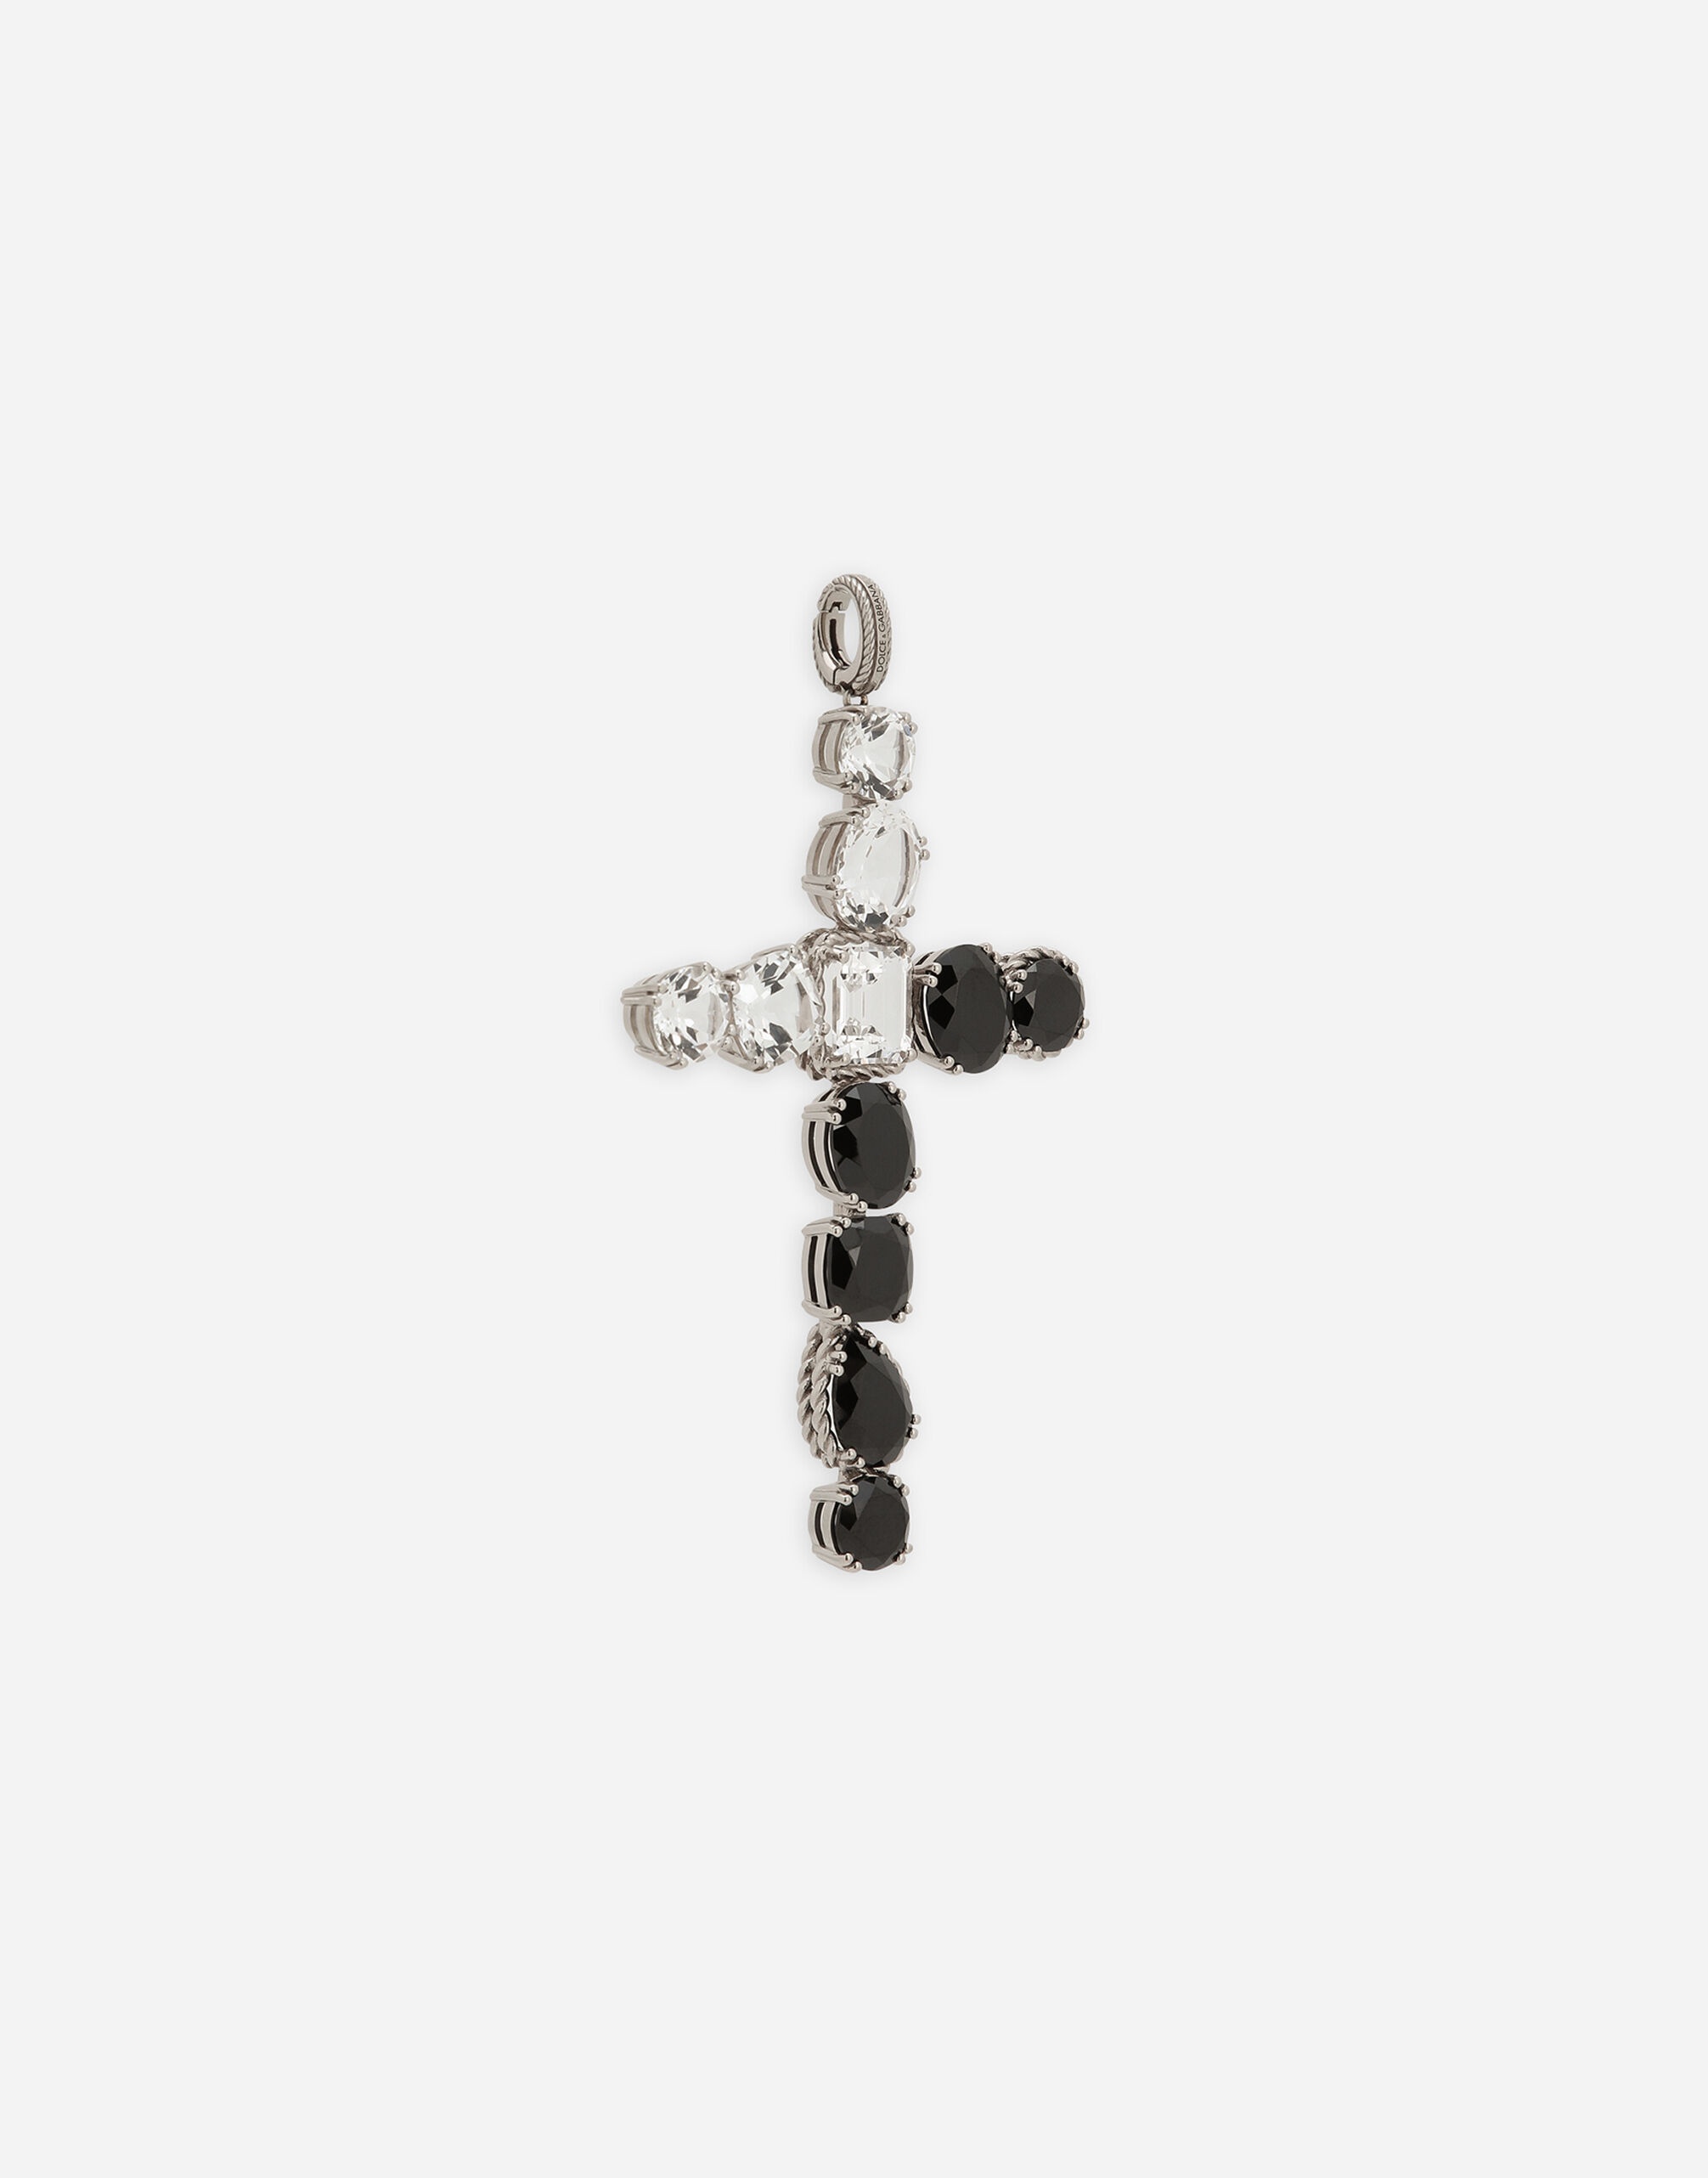 18k white gold Anna charm with colorless topazes and black spinels - 3